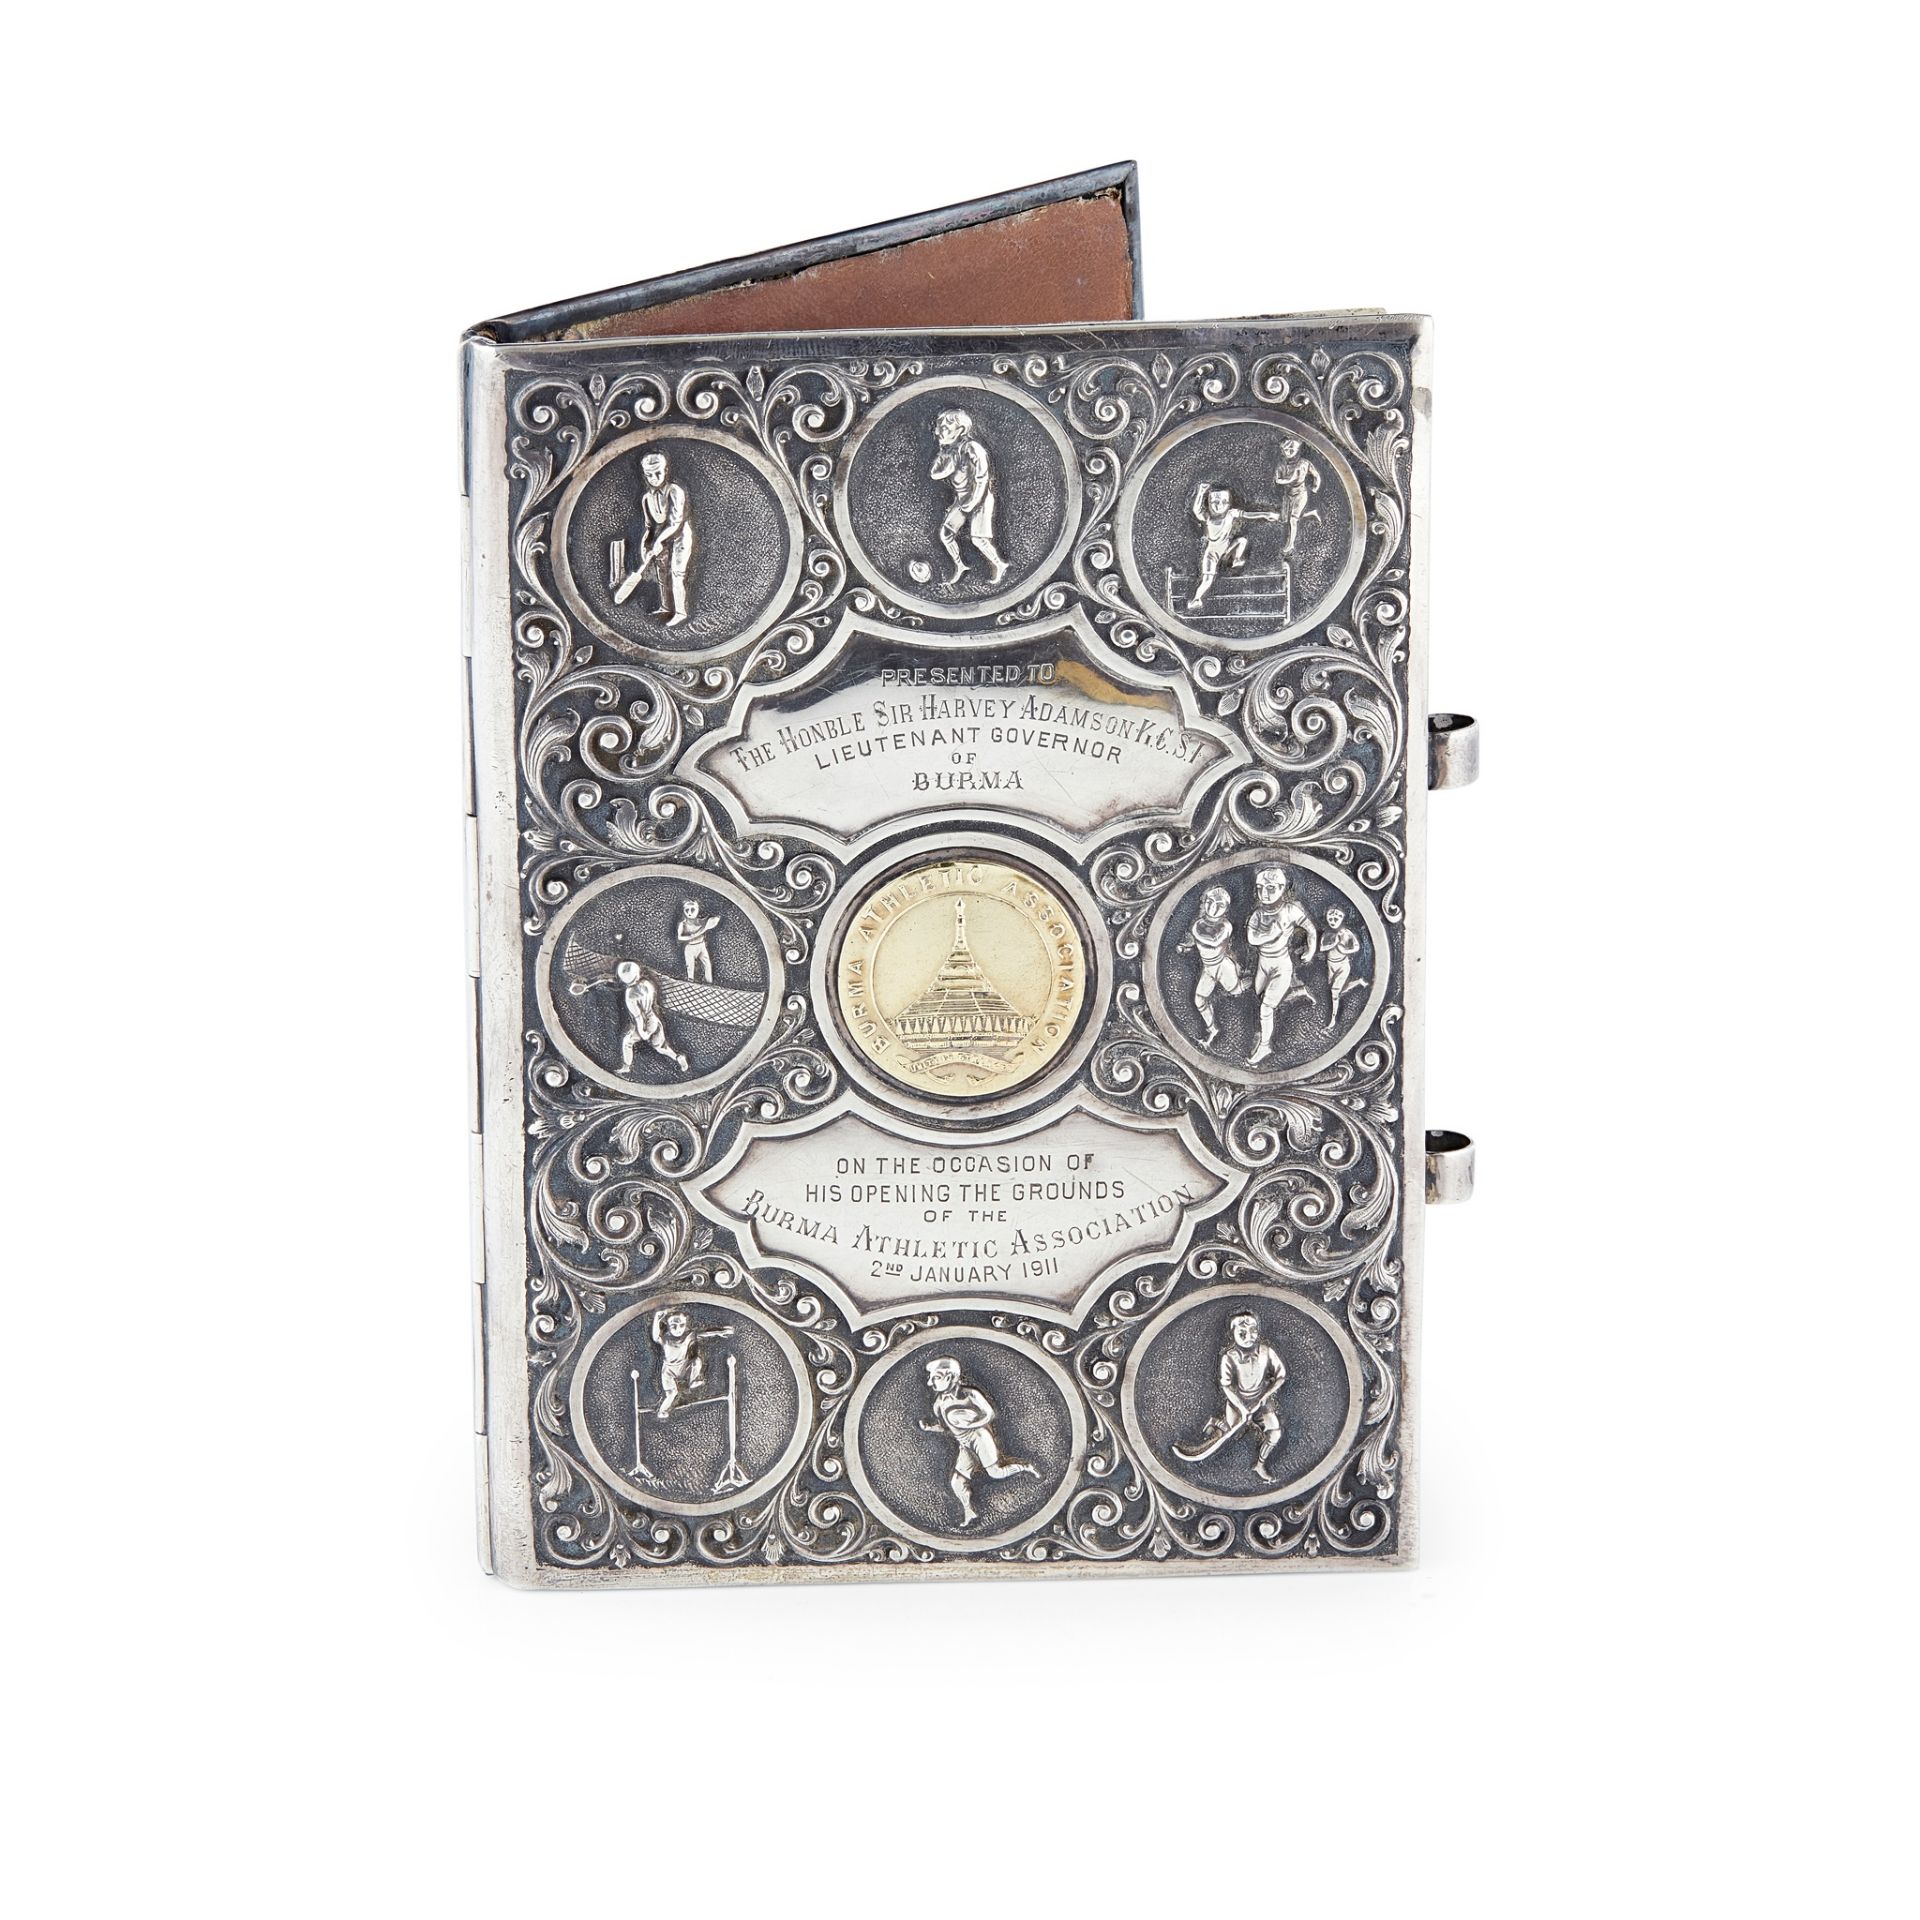 BURMESE SILVER AND SILVER GILT NOTEBOOK COVER, RELATING TO THE BURMA ATHLETIC ASSOCIATION DATED - Image 2 of 2